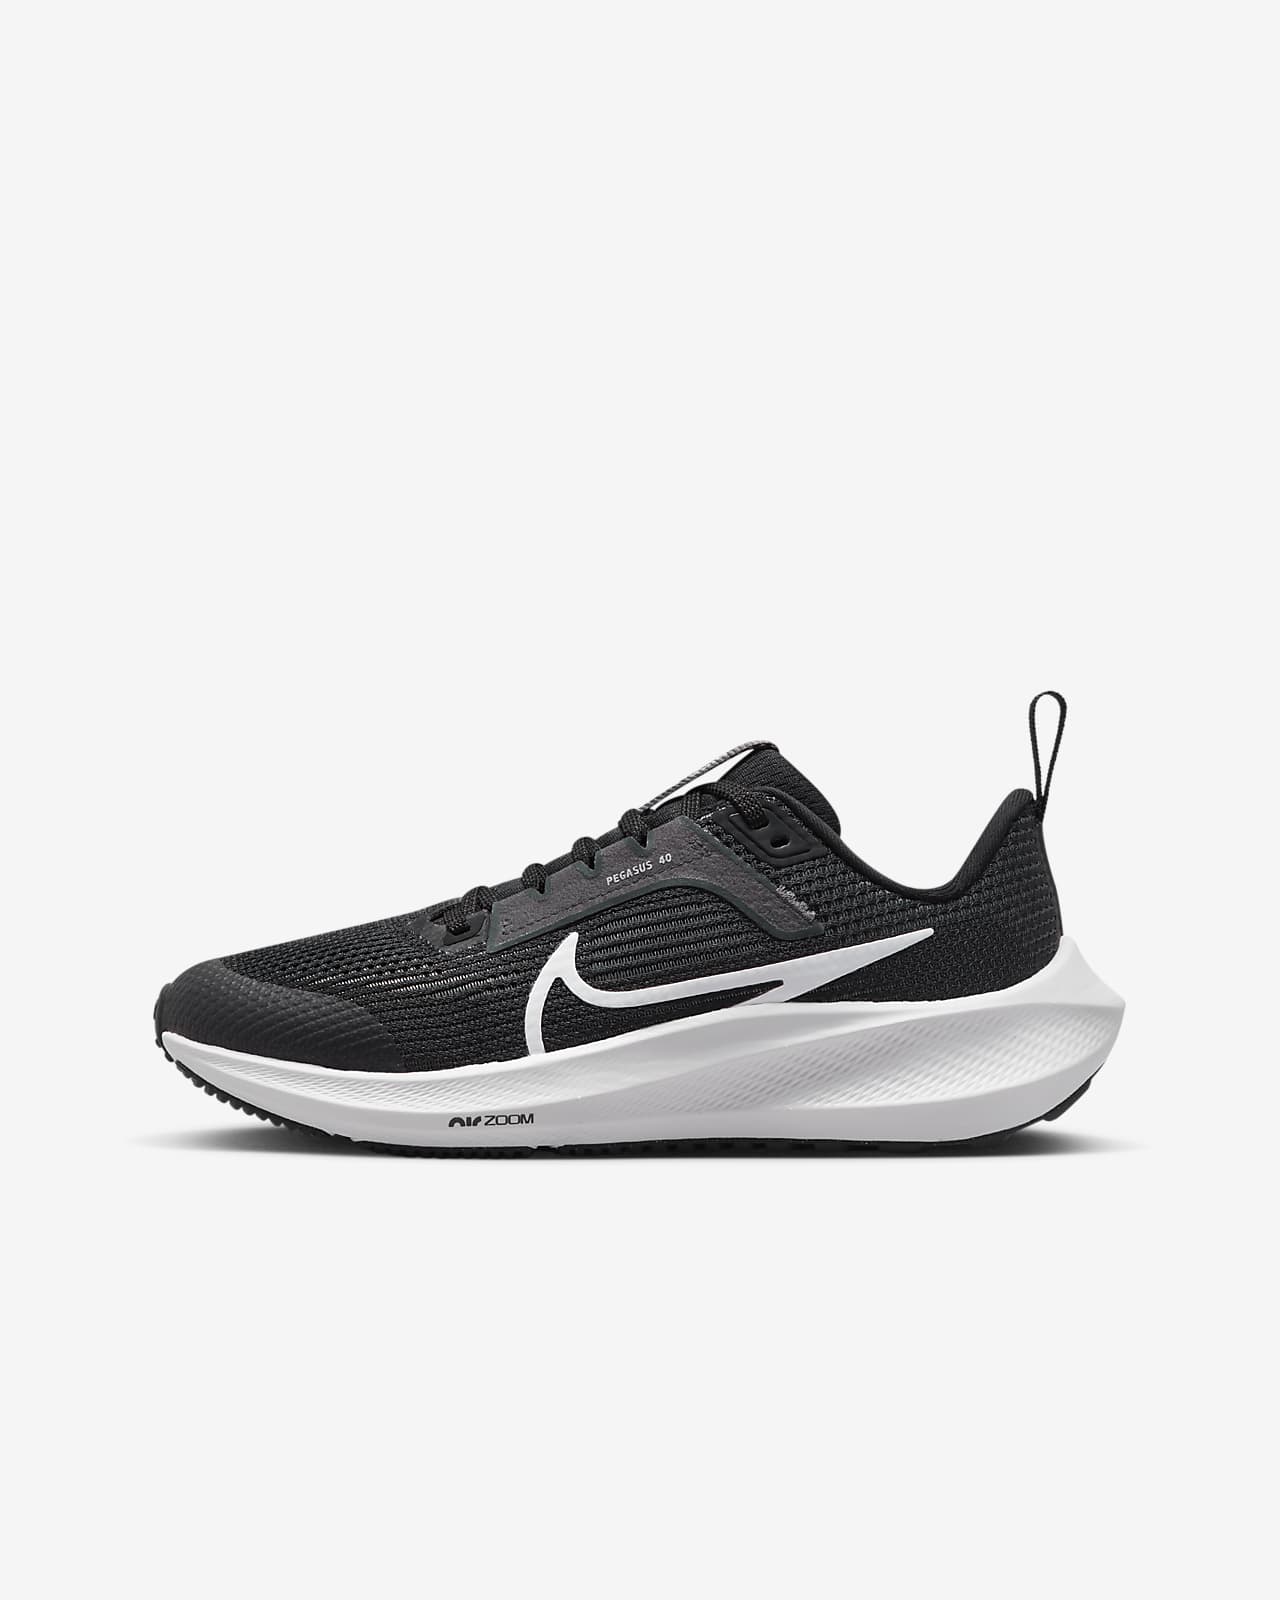 NIKE airzoom